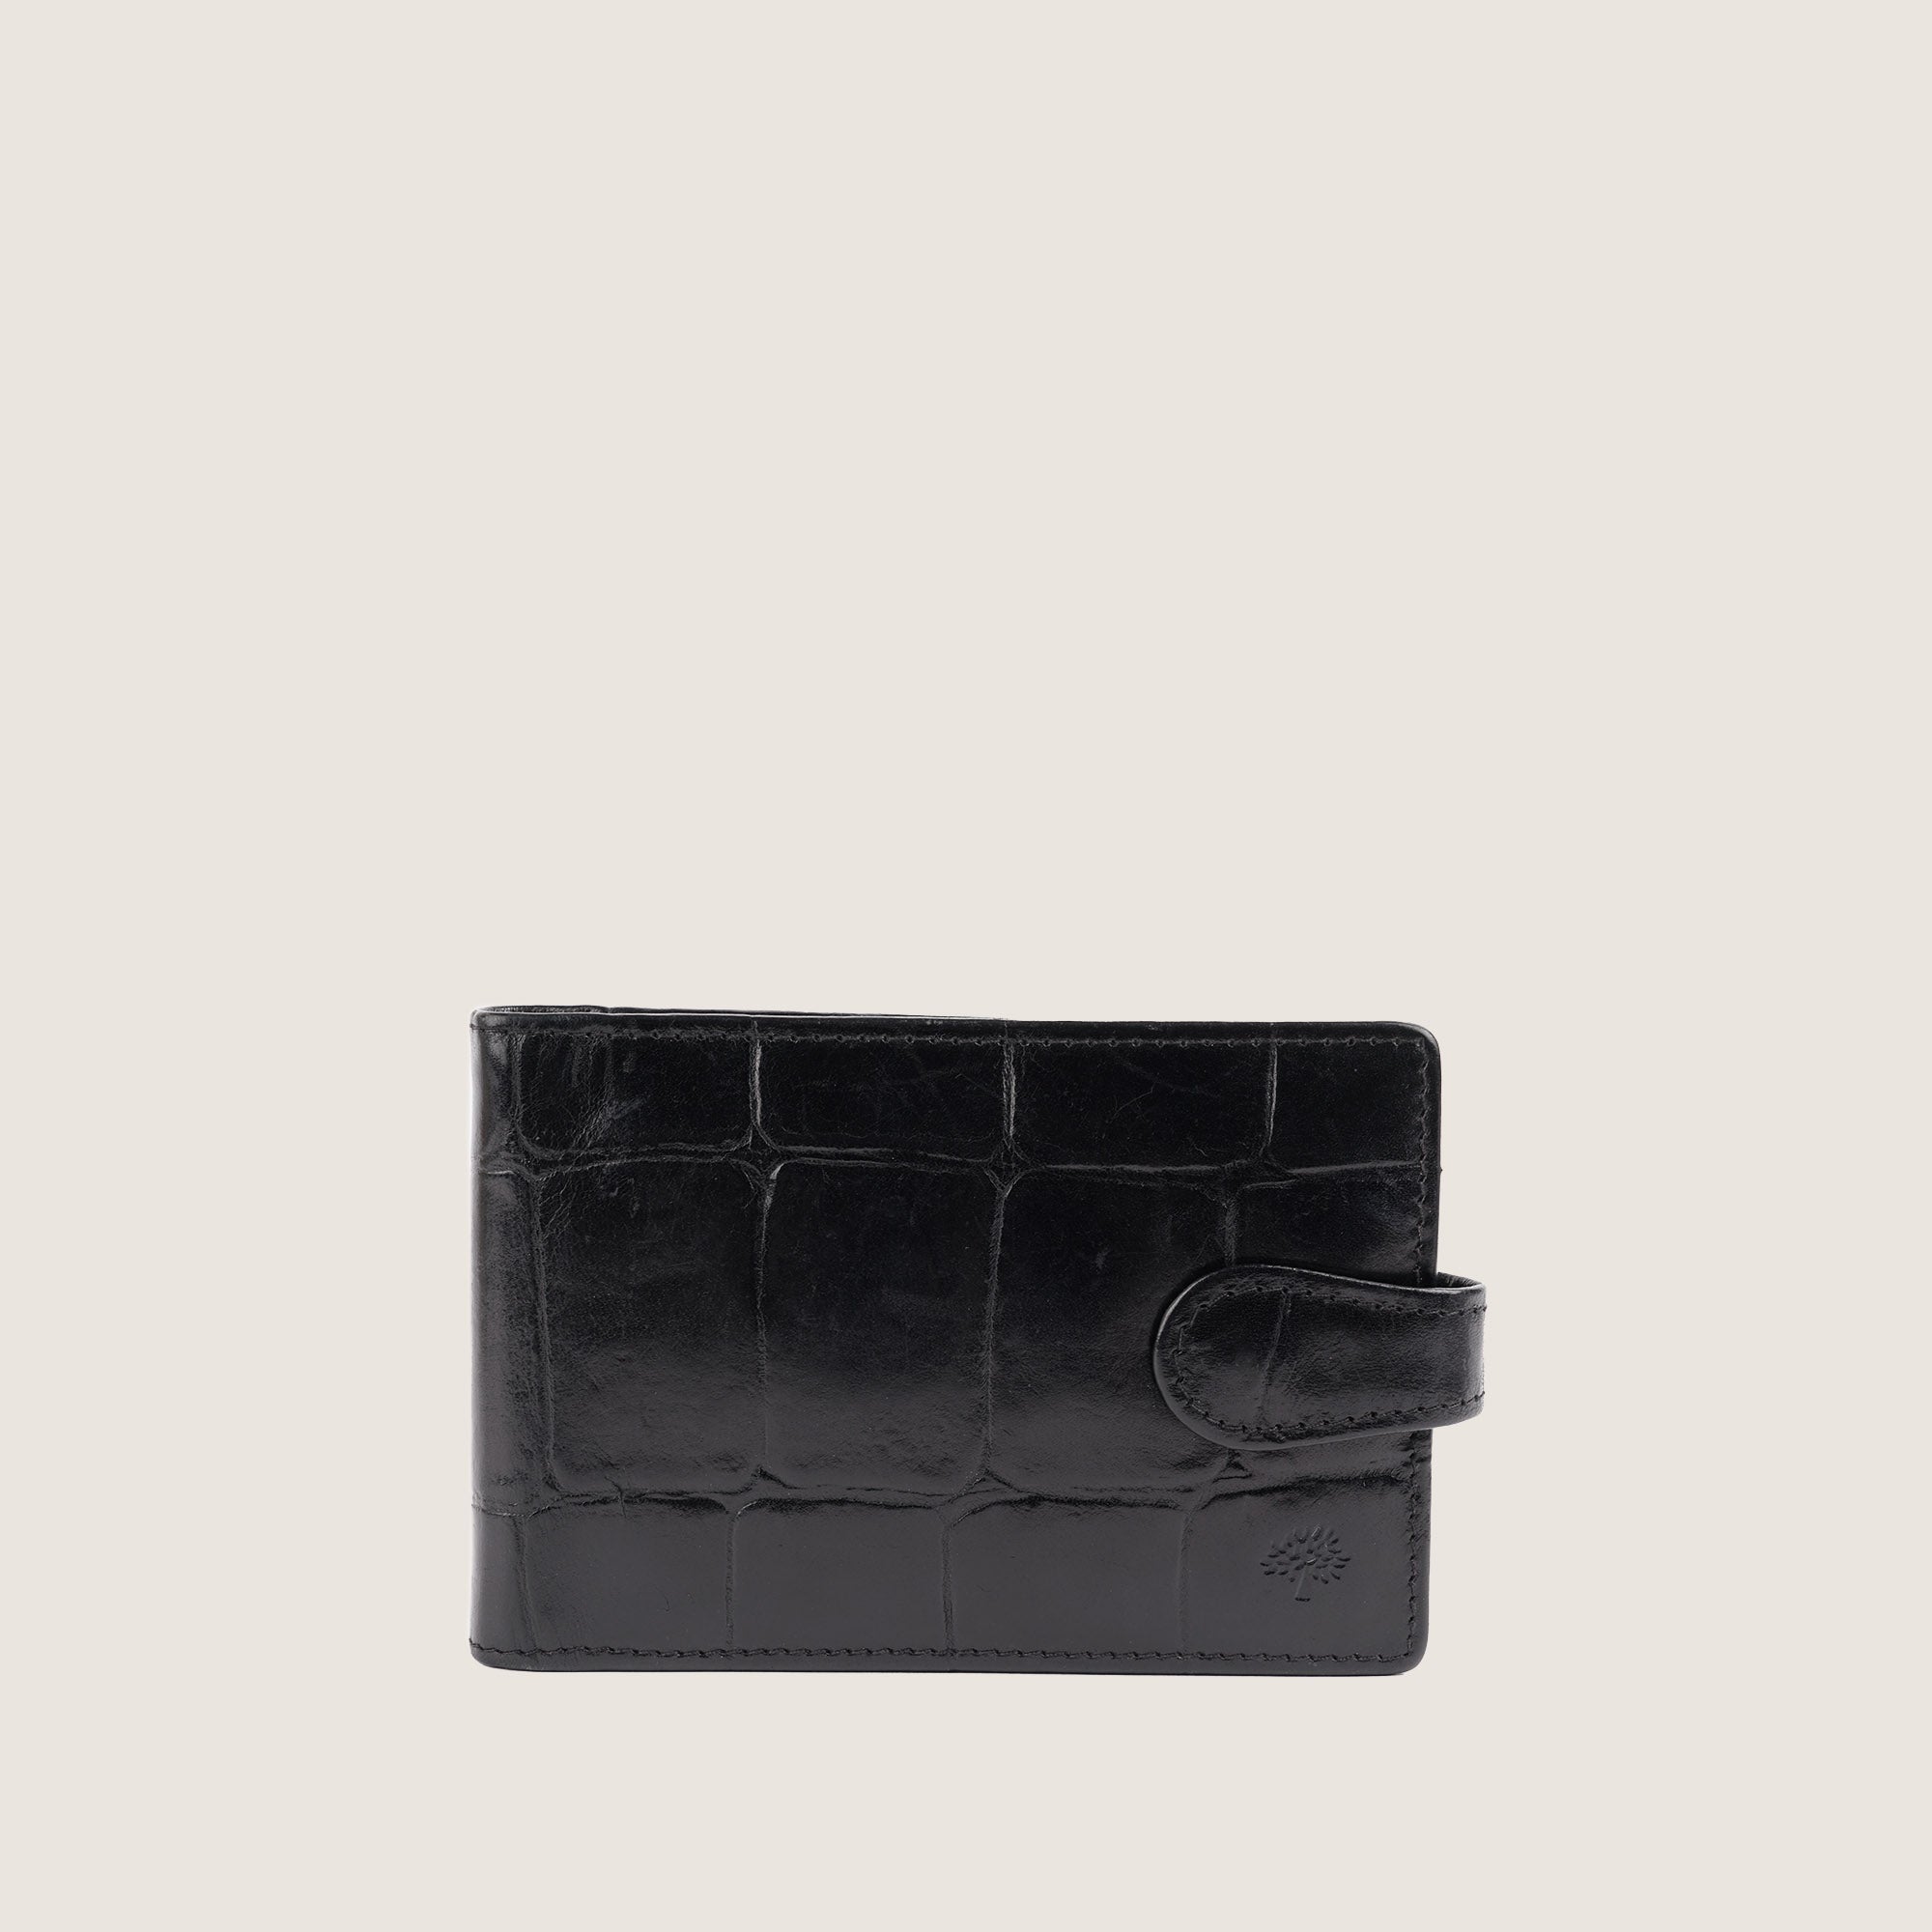 Agenda Wallet - MULBERRY - Affordable Luxury image